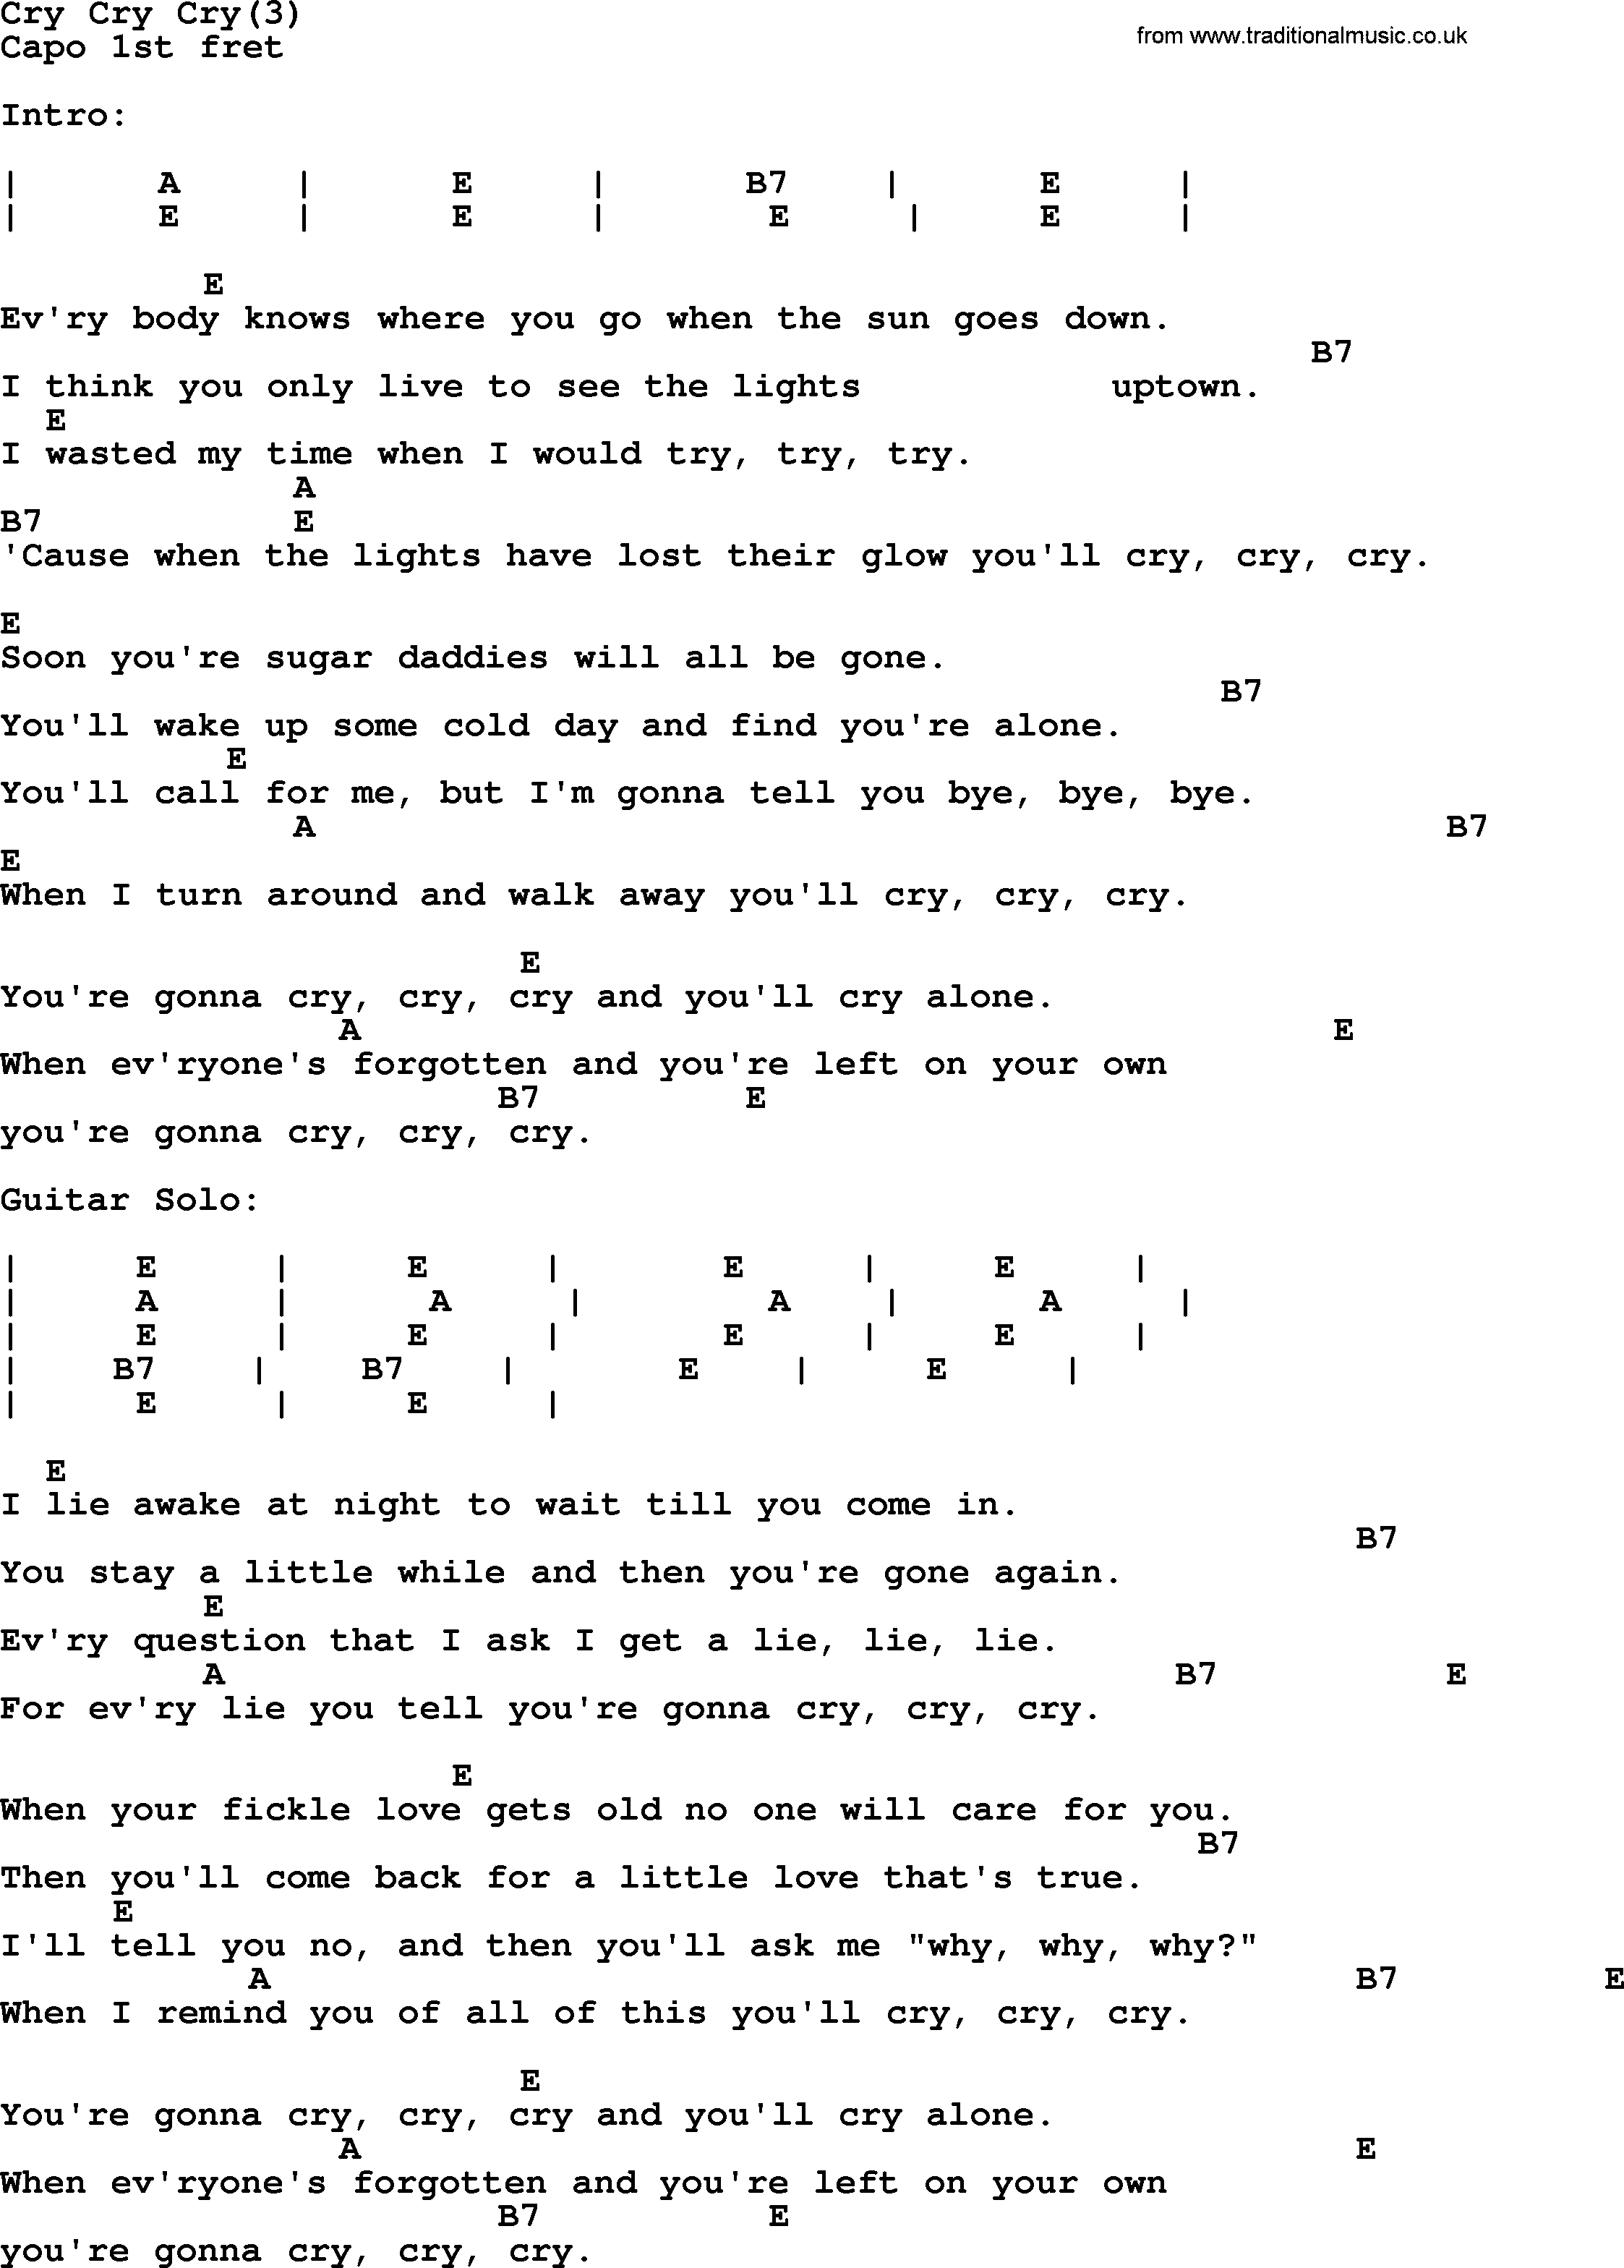 Johnny Cash song Cry Cry Cry(3), lyrics and chords